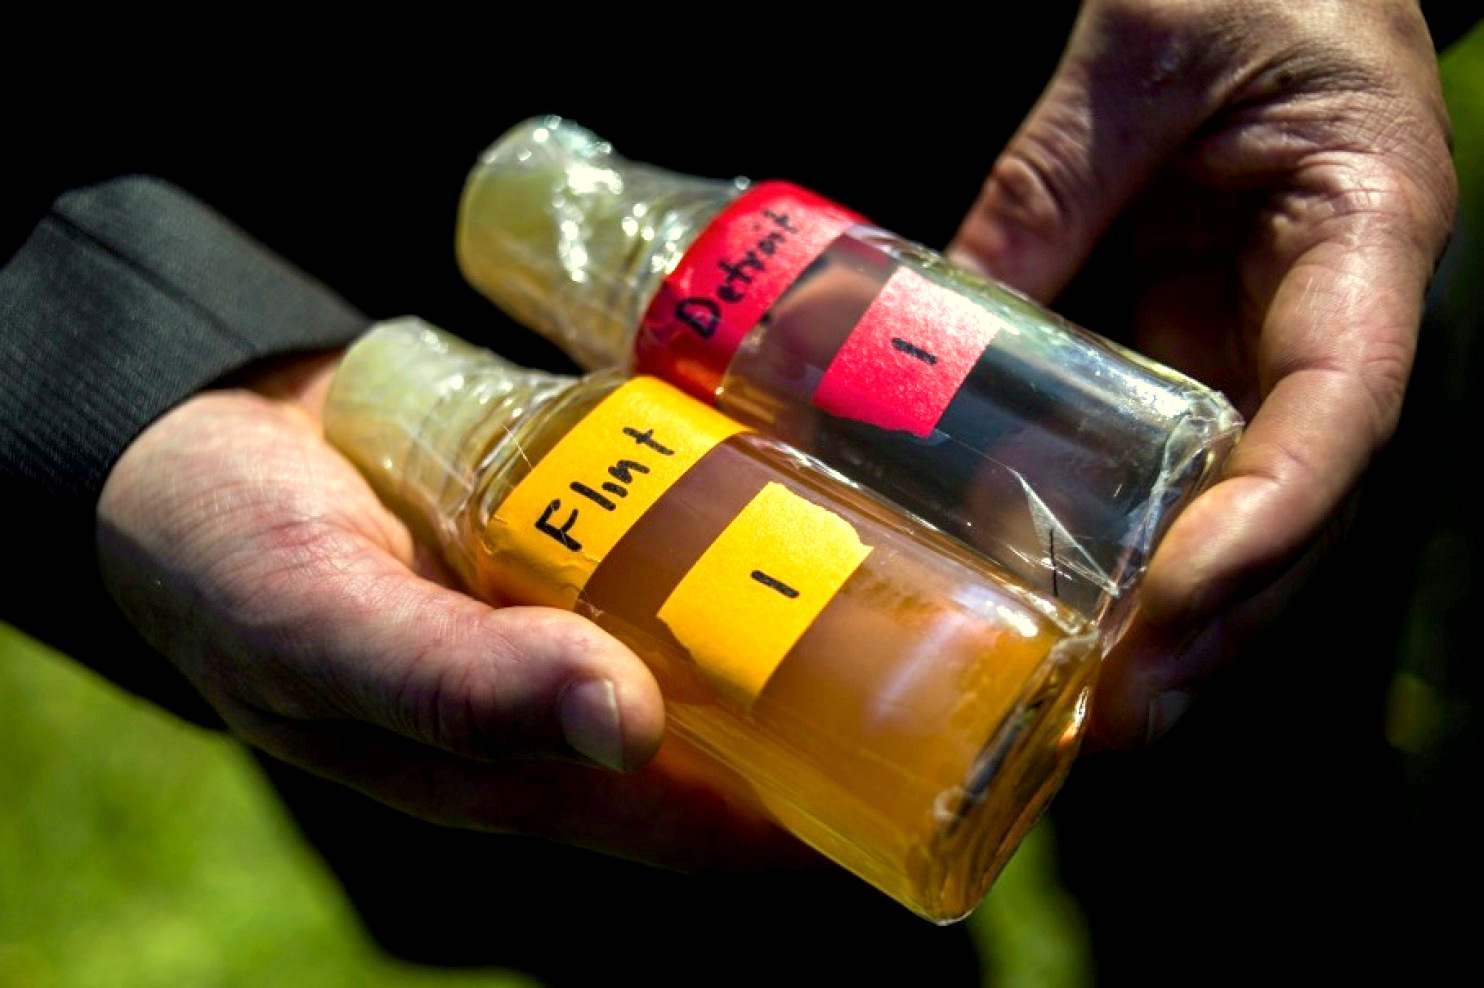 Virginia Tech professor Marc Edwards shows the difference in water quality between Detroit and Flint after testing, giving evidence after more than 270 samples were sent in from Flint that show high levels of lead during a news conference on Tuesday, Sept. 15, 2015 outside of City Hall in downtown Flint, Mich. (Jake May/The Flint Journal via AP)